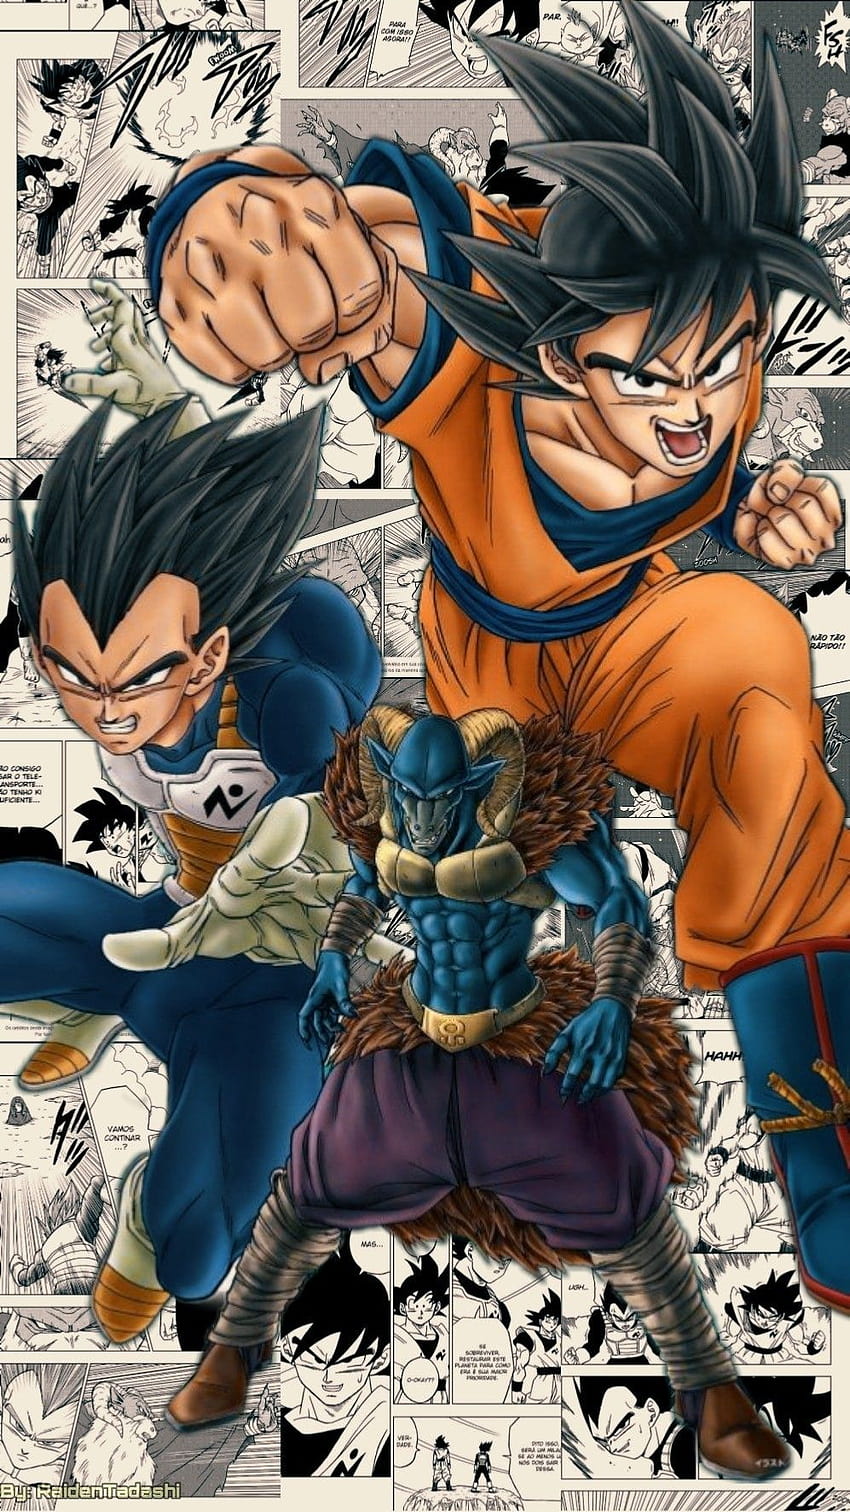 Pin by - DIONE - - on DBZ  Anime dragon ball super, Anime dragon ball, Dragon  ball super manga